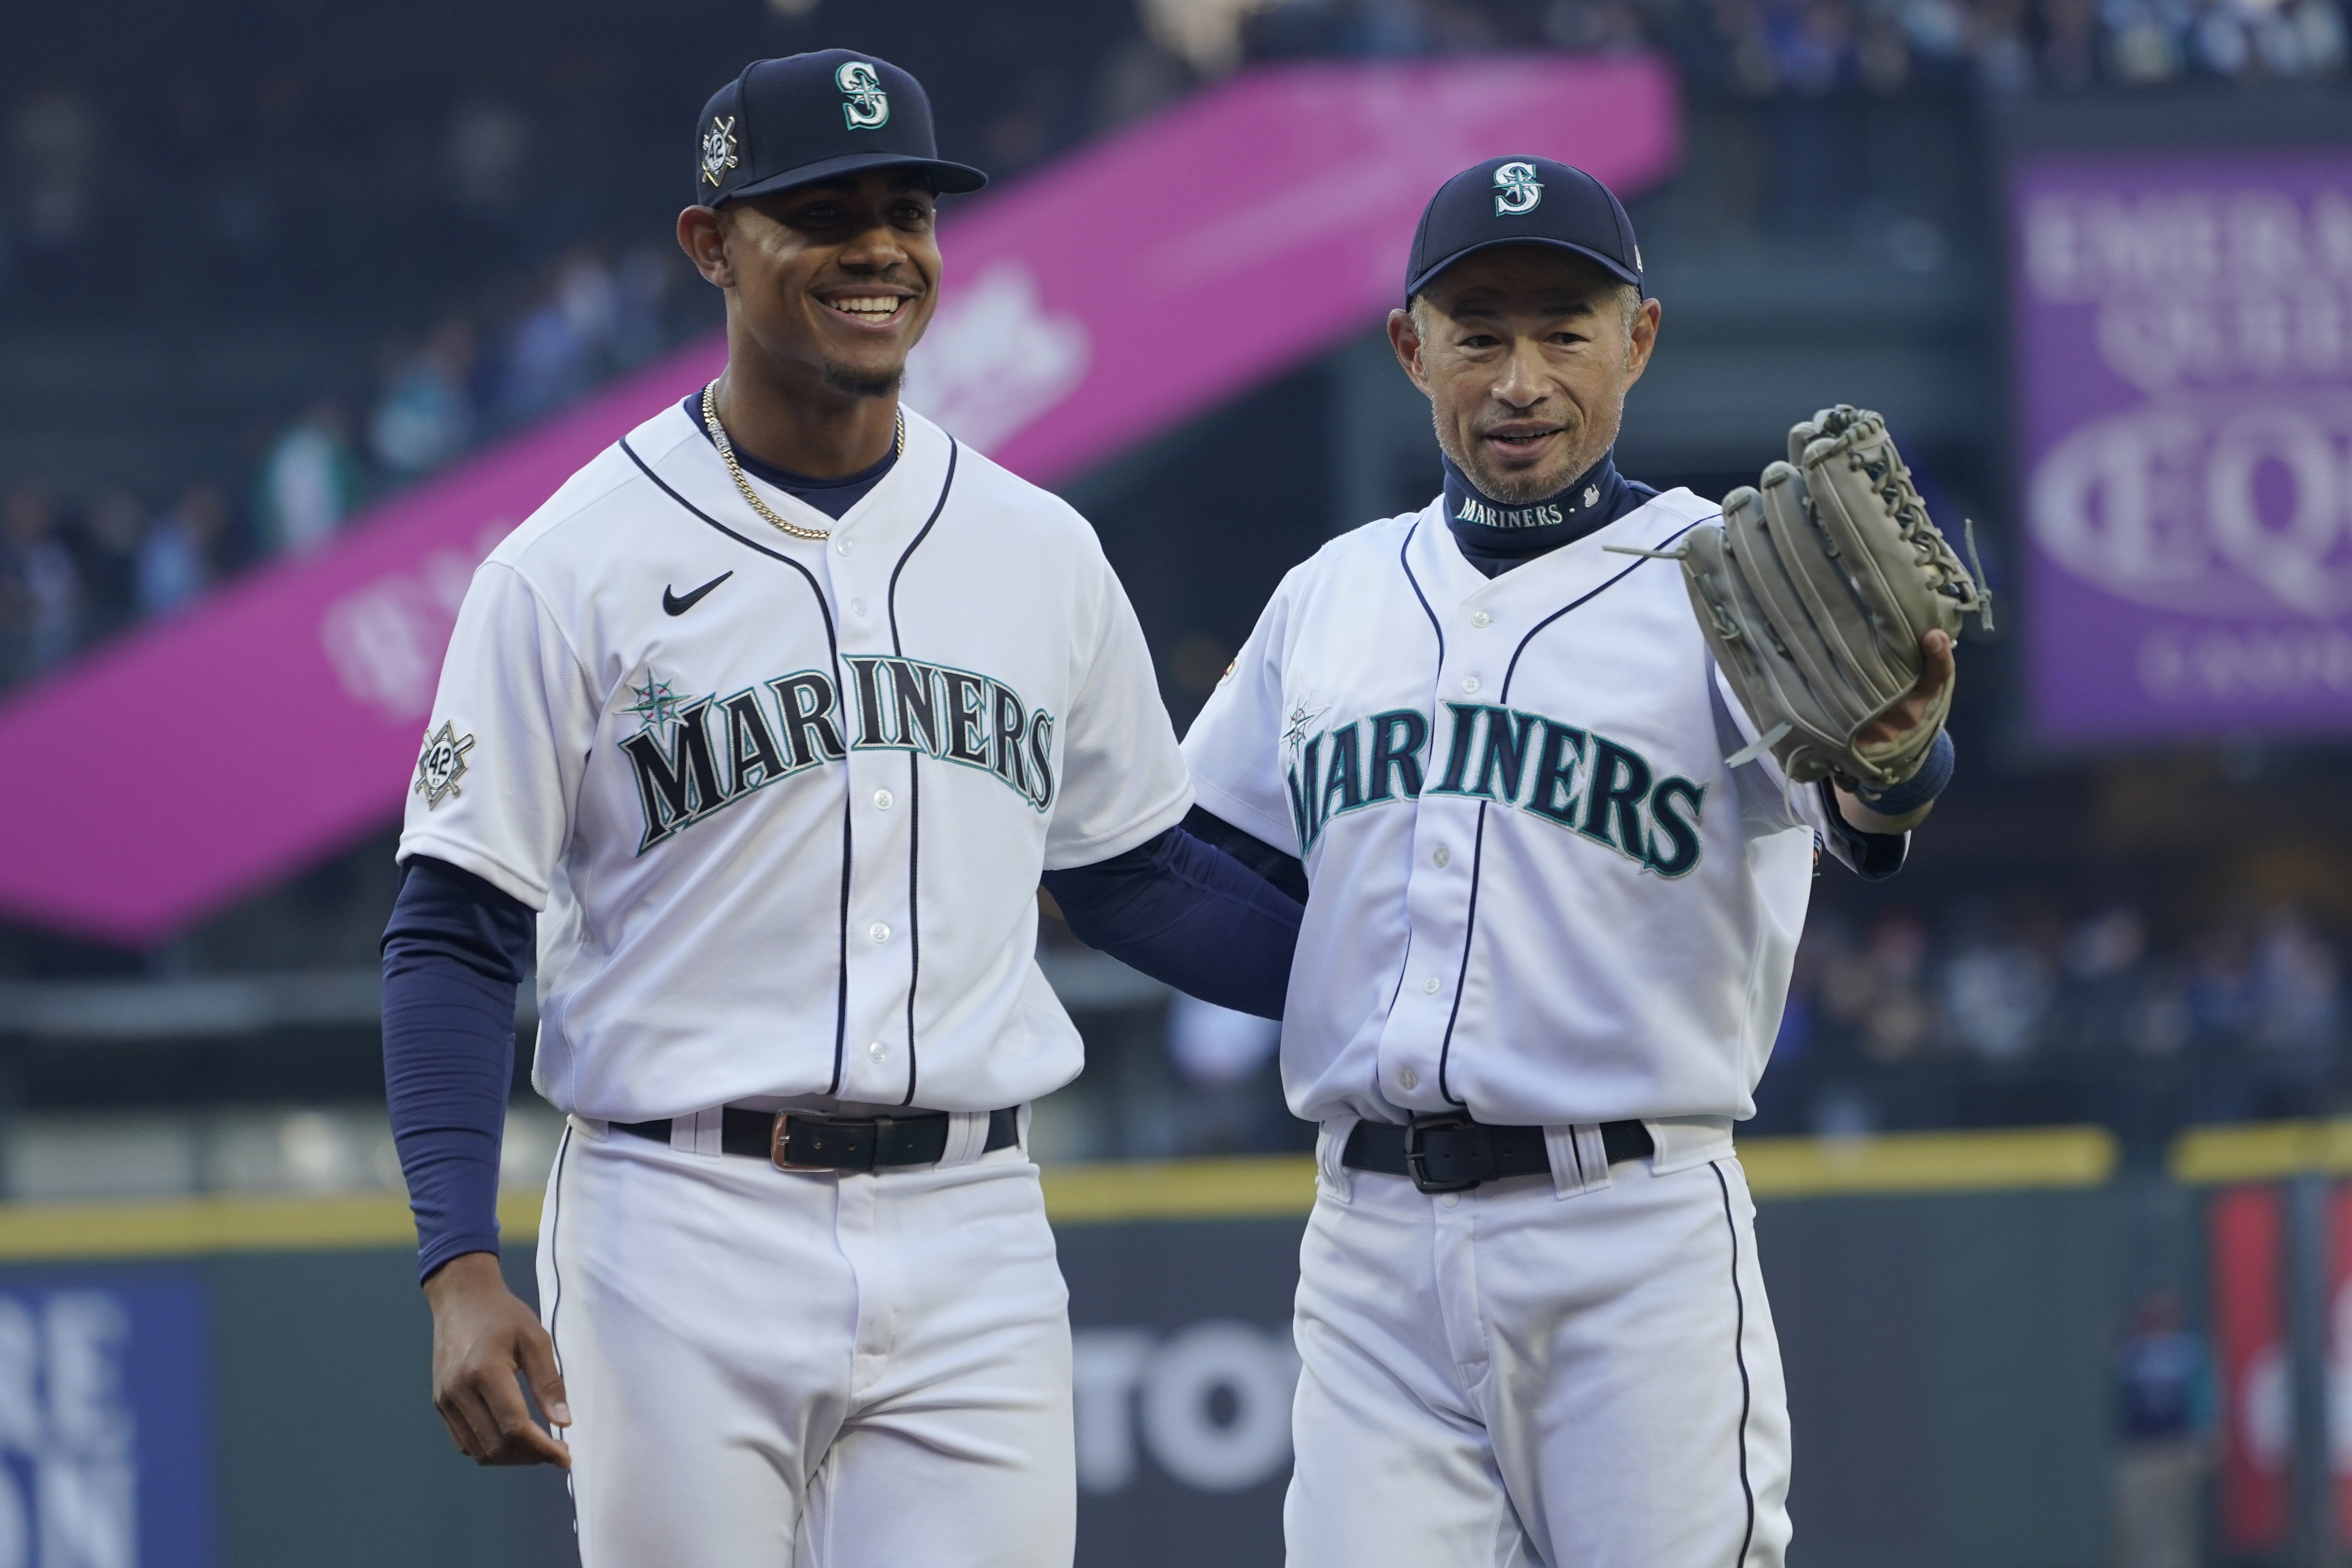 Frazier, Gonzales lead Mariners past Astros 11-1 in home opener